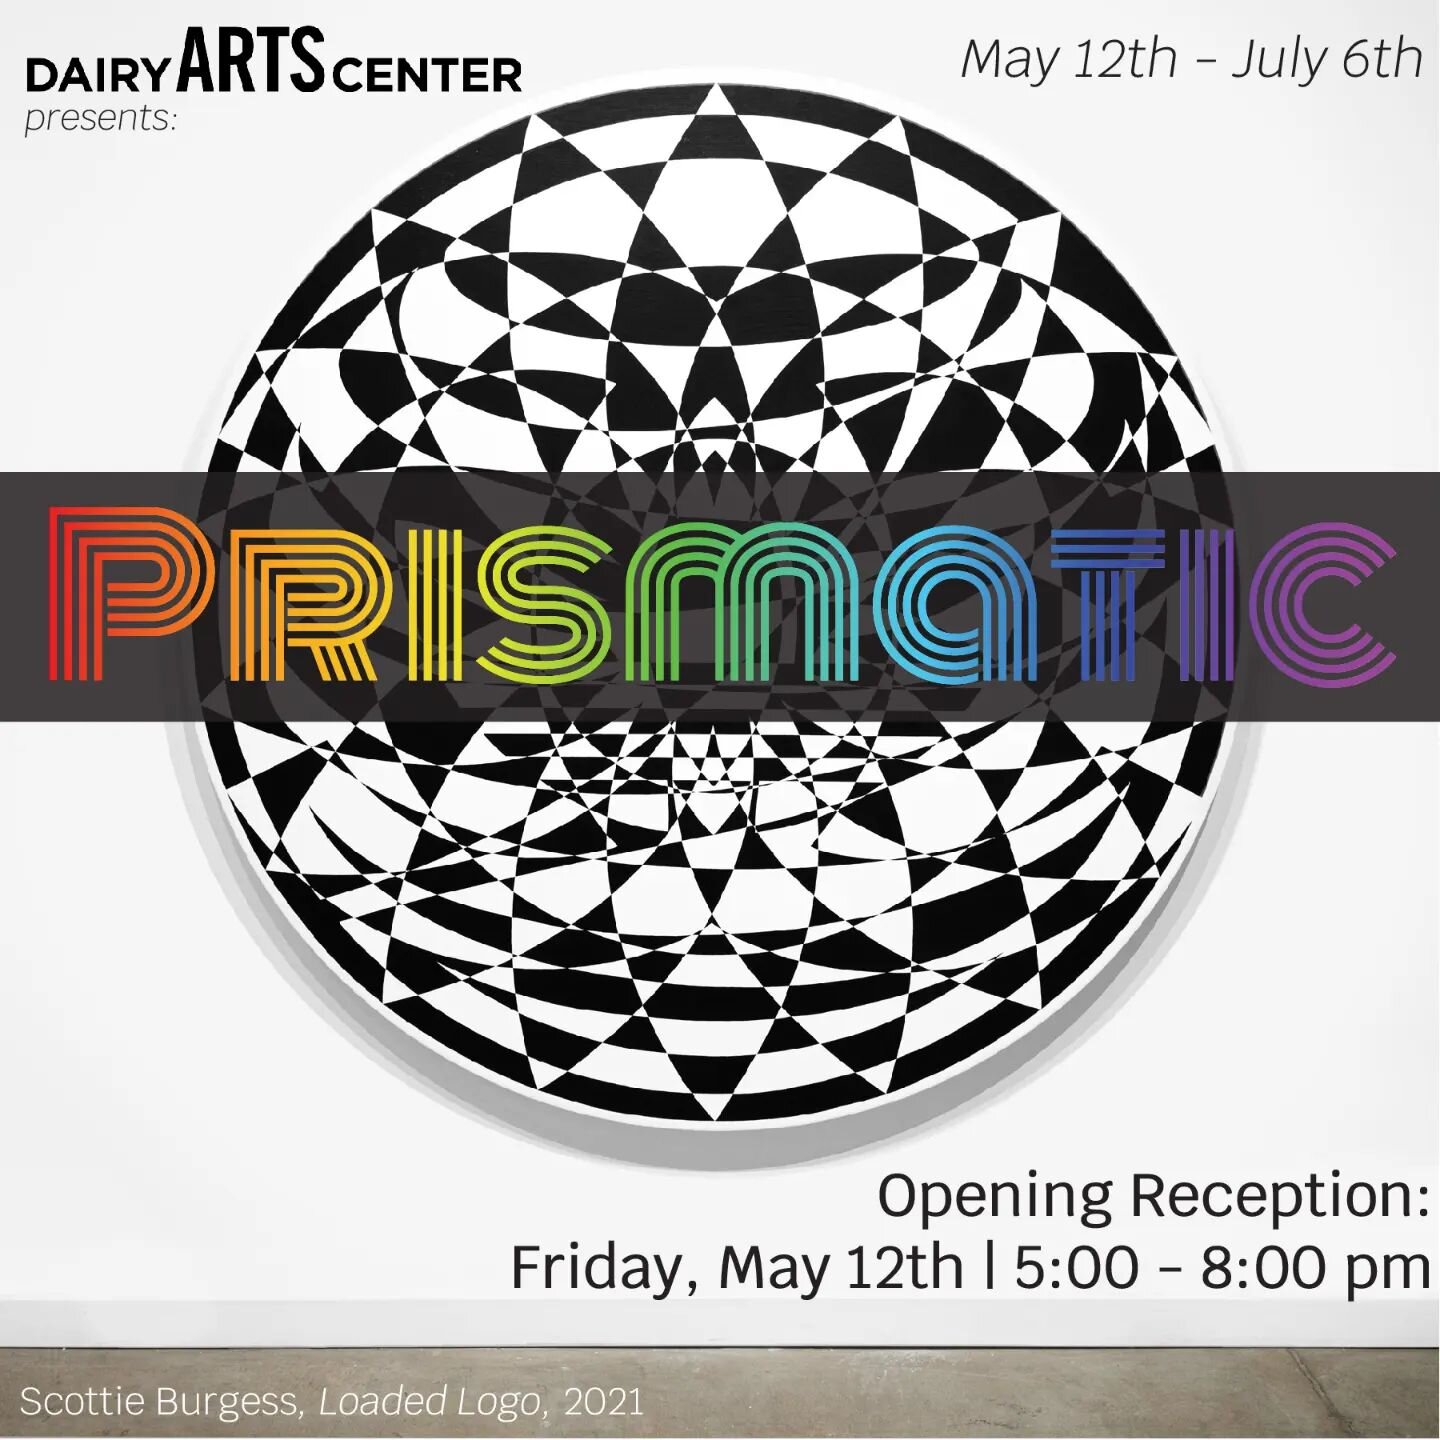 I'm looking forward to showing my work @dairyarts alongside many amazing queer artsits.

Prismatic opens May 12th from 5pm to 8pm.

&quot;Prismatic, is an exhibition celebrating the queer community across the Front Range for Pride month, most often c